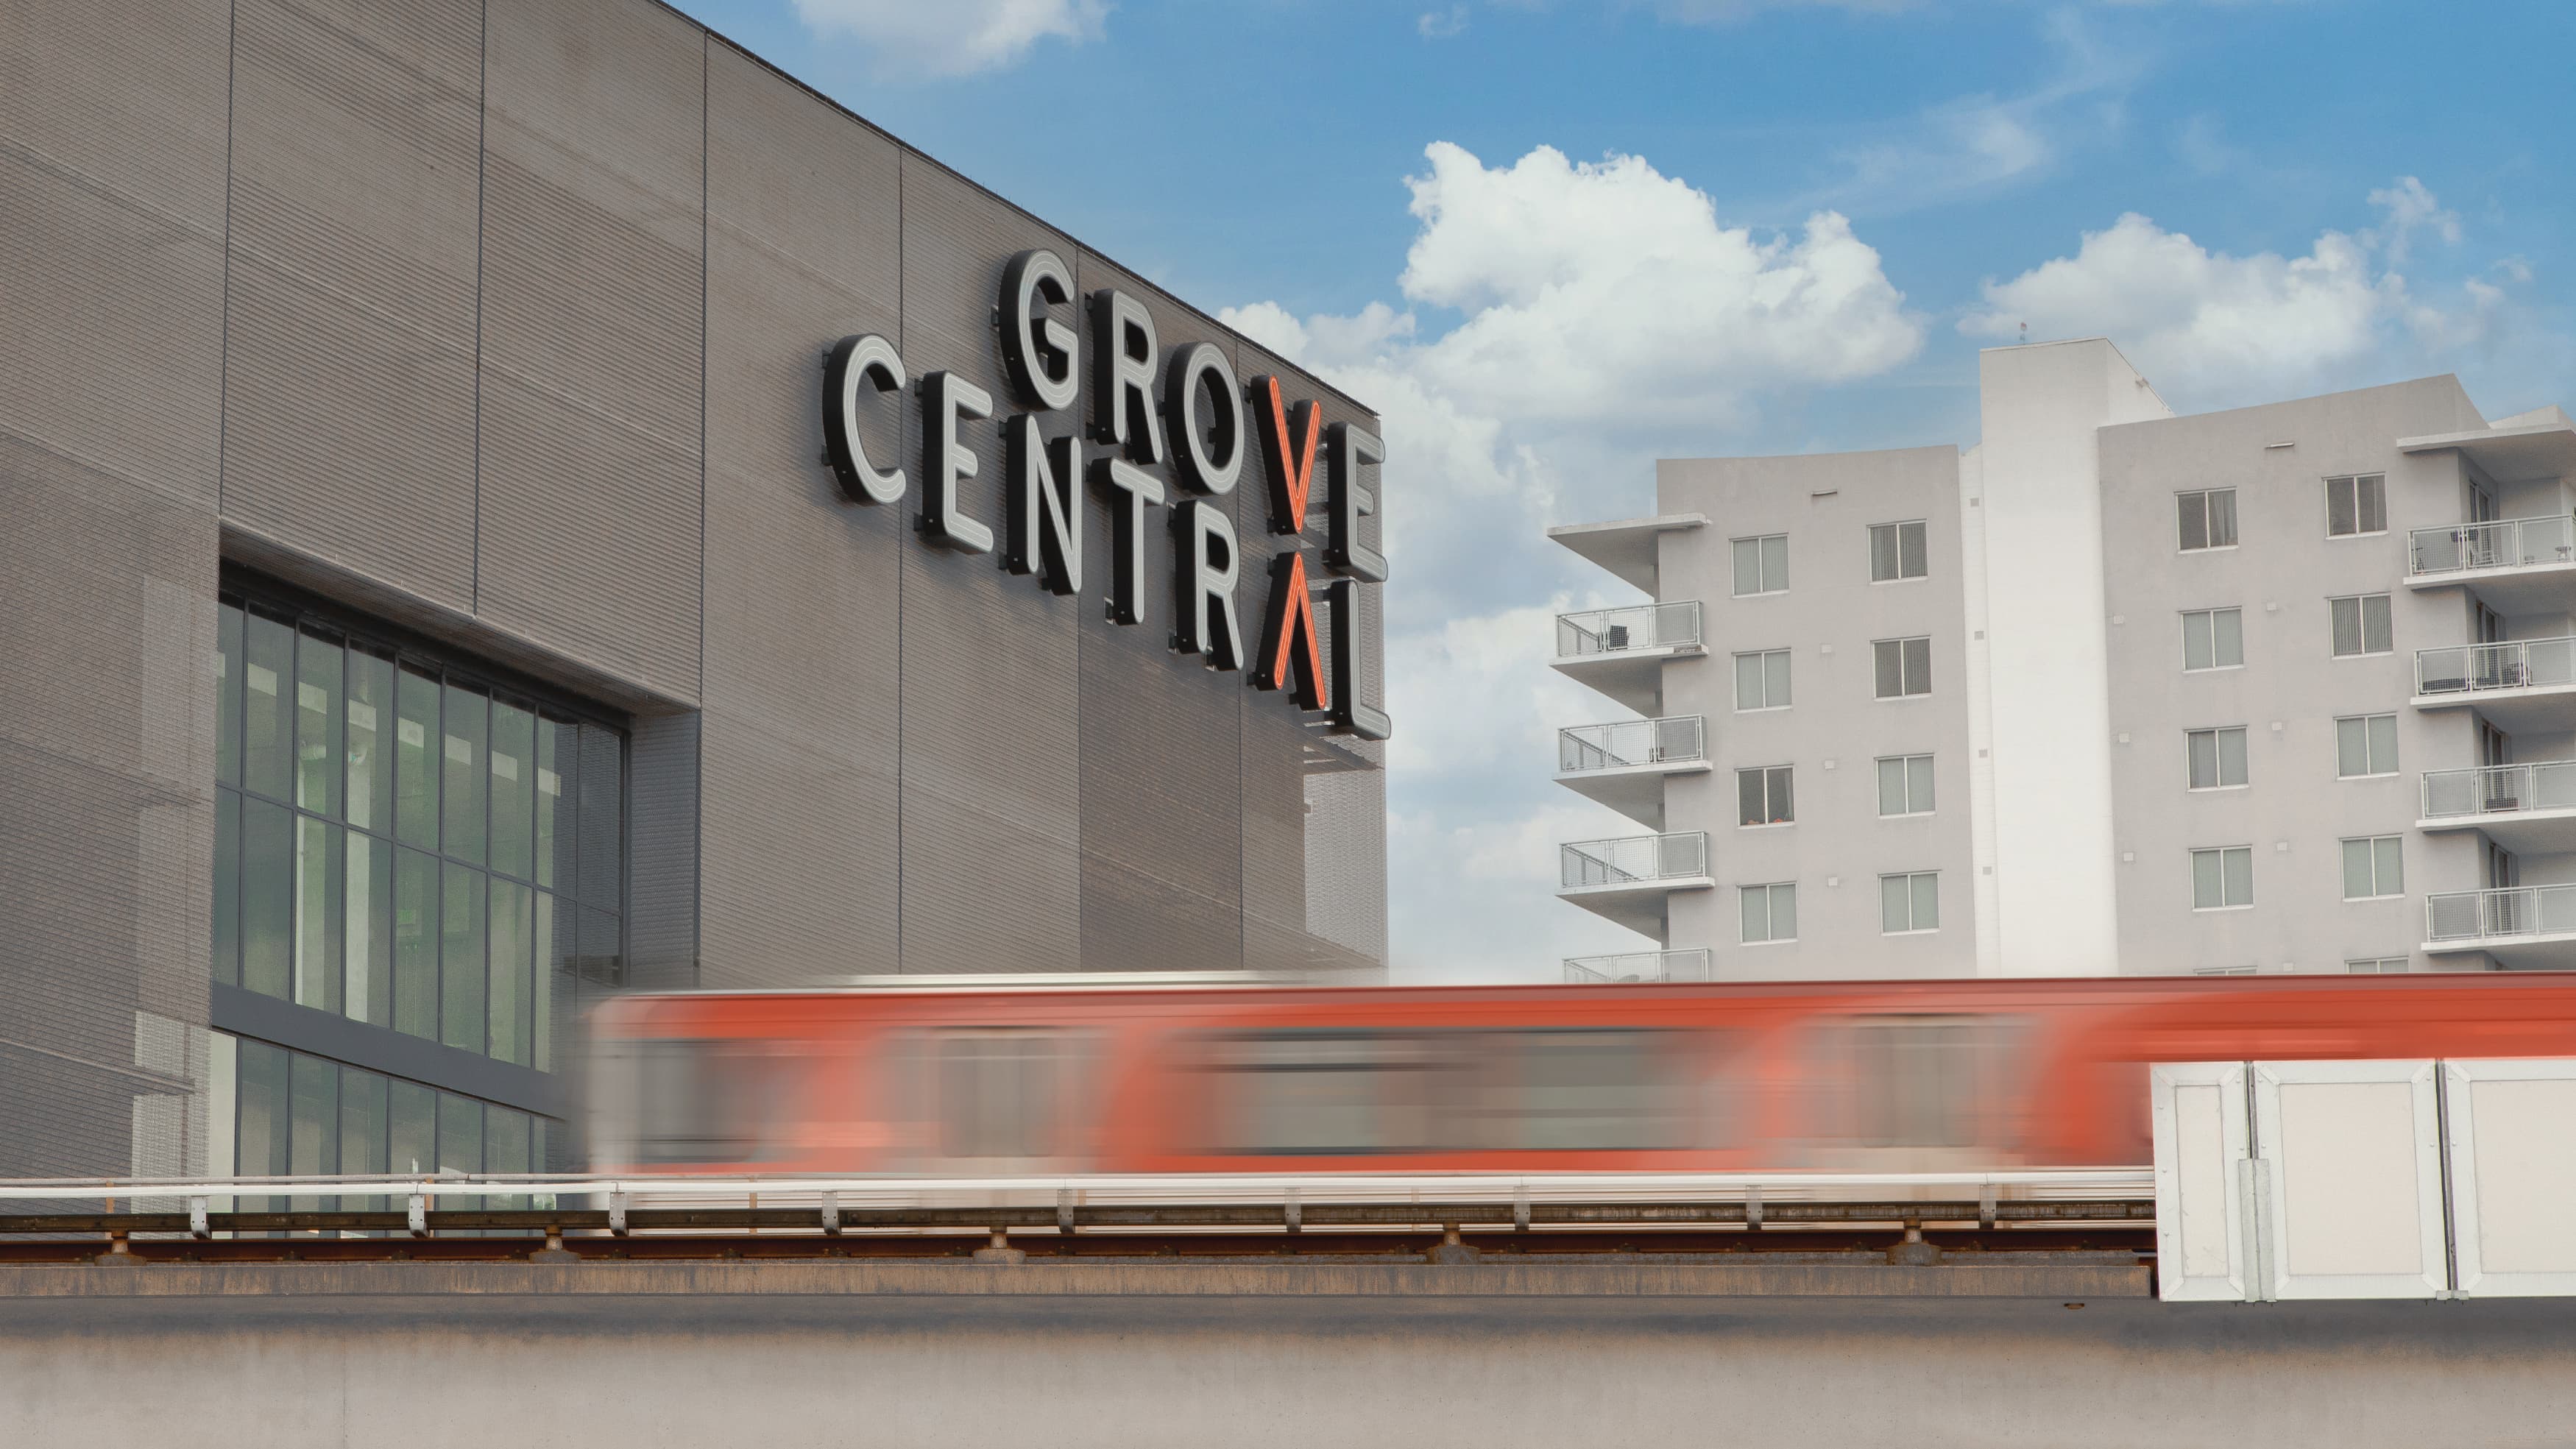 Image of the master sign for Grove Central, designed by RSM Design, along the transit tracks. 